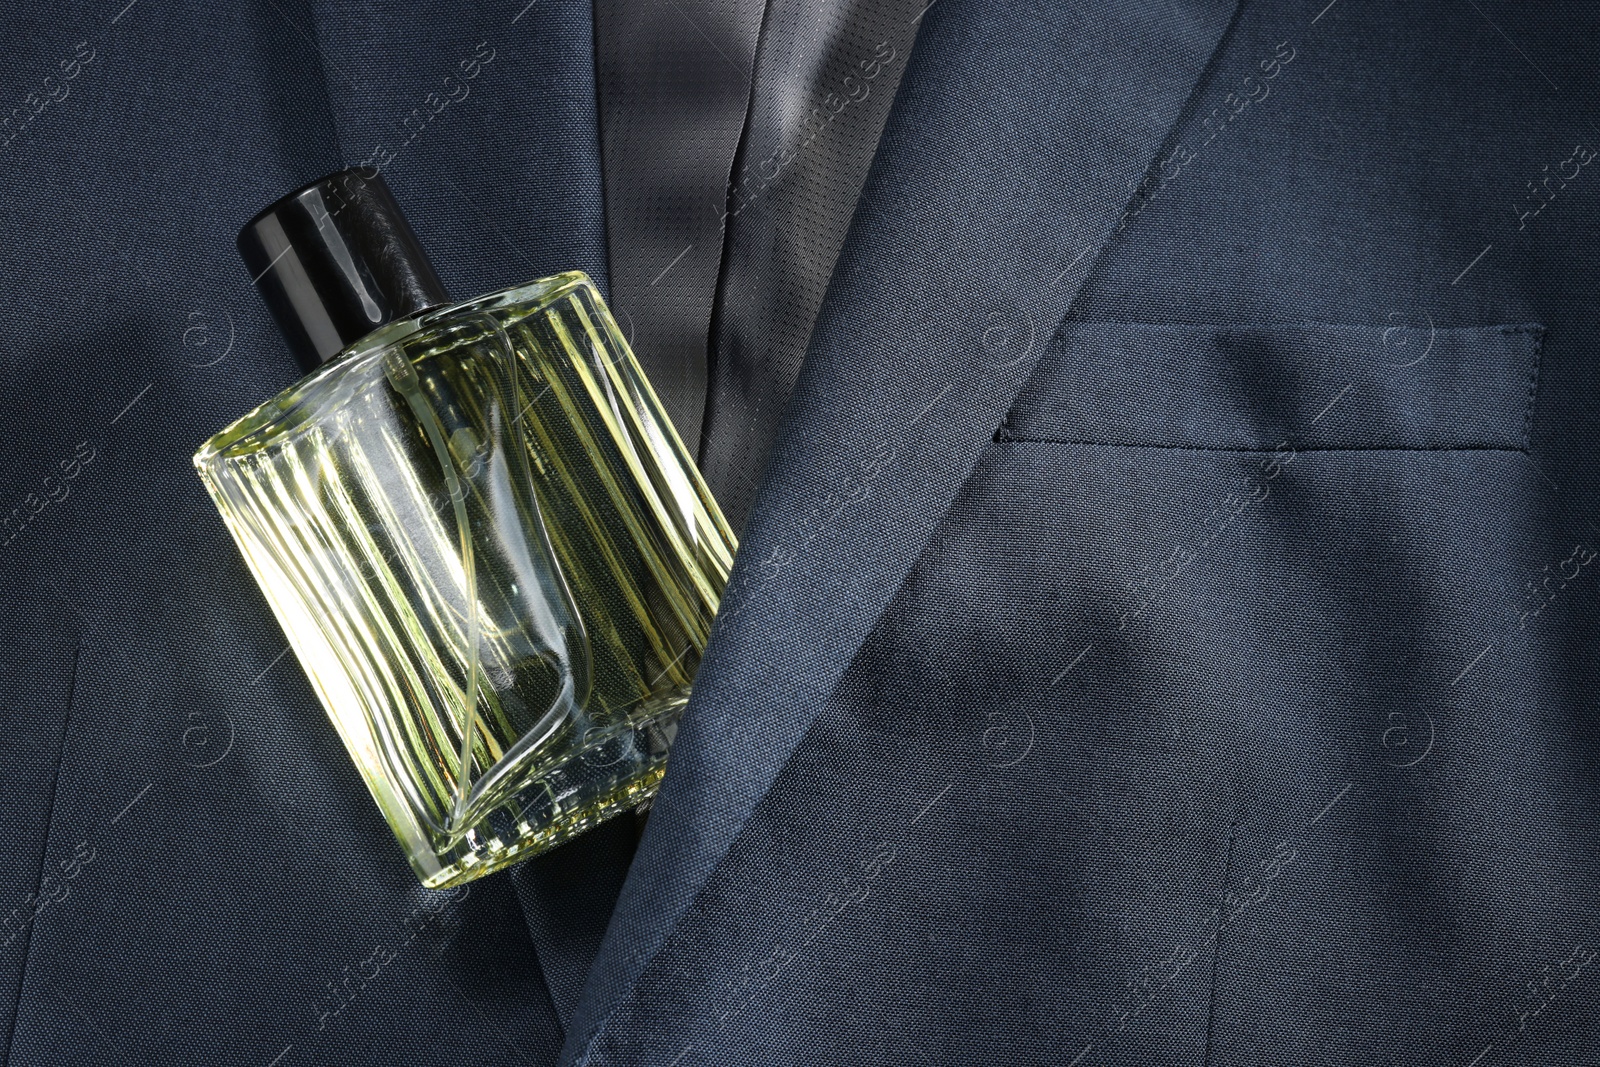 Photo of Luxury men's perfume in bottle on grey jacket, top view. Space for text